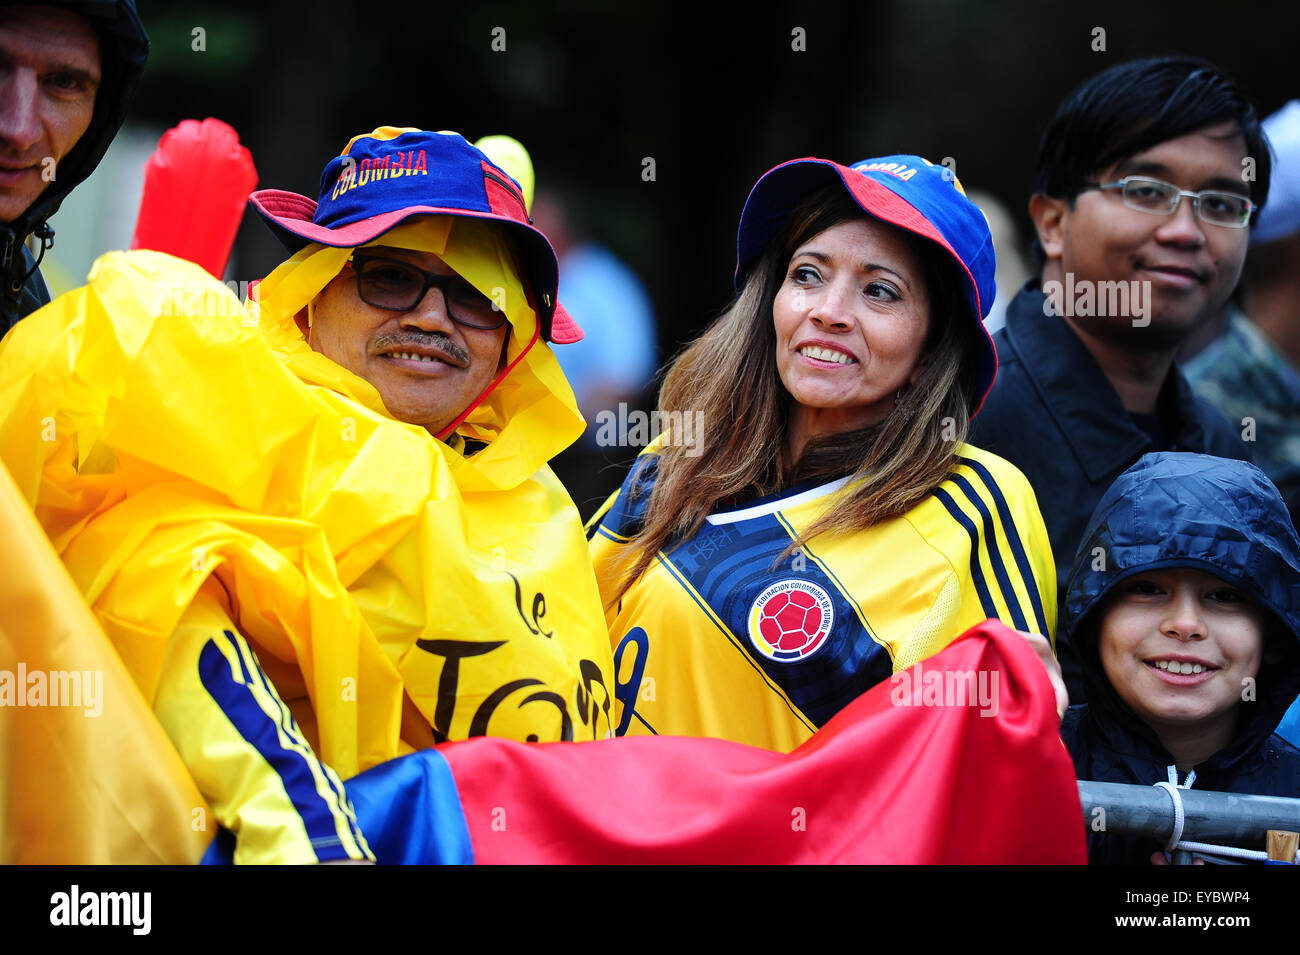 Paris, France. July 26, 2015. Colombian cycling fans at Champs Elysees during Stage 21 of Tour de France in Paris. Photo: Miroslav Dakov/ Alamy Live News Stock Photo